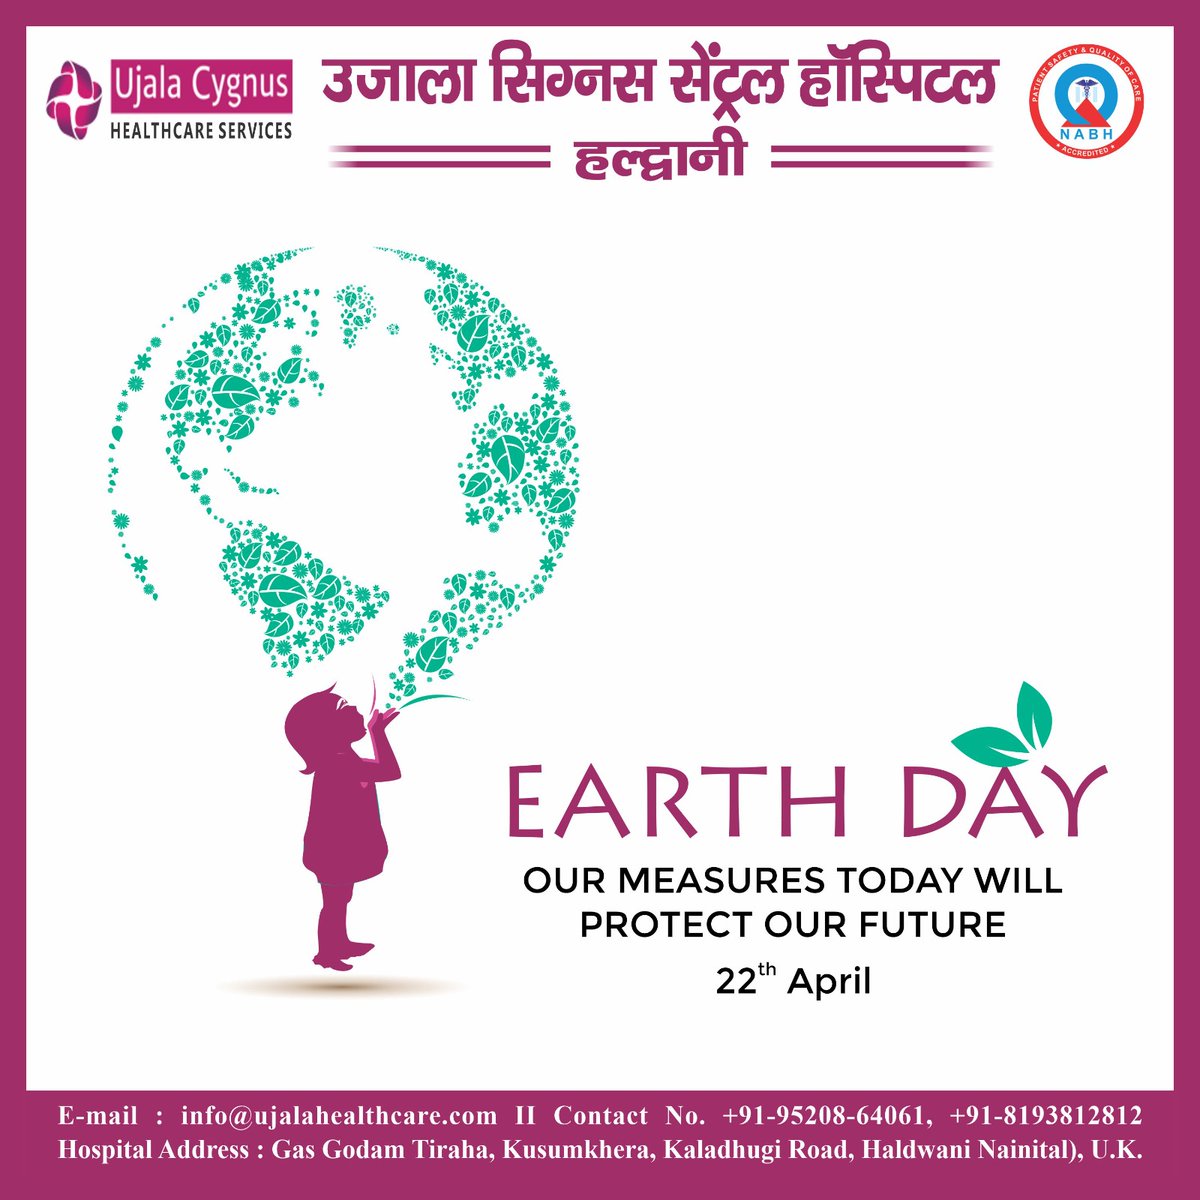 As we celebrate Earth Day, let's remember that the health of our planet is essential for our well-being.
We all have a role to play in preserving the earth for future generations.

#EarthDay #EarthDay2023 #AsterBangalore #AsterHospitals